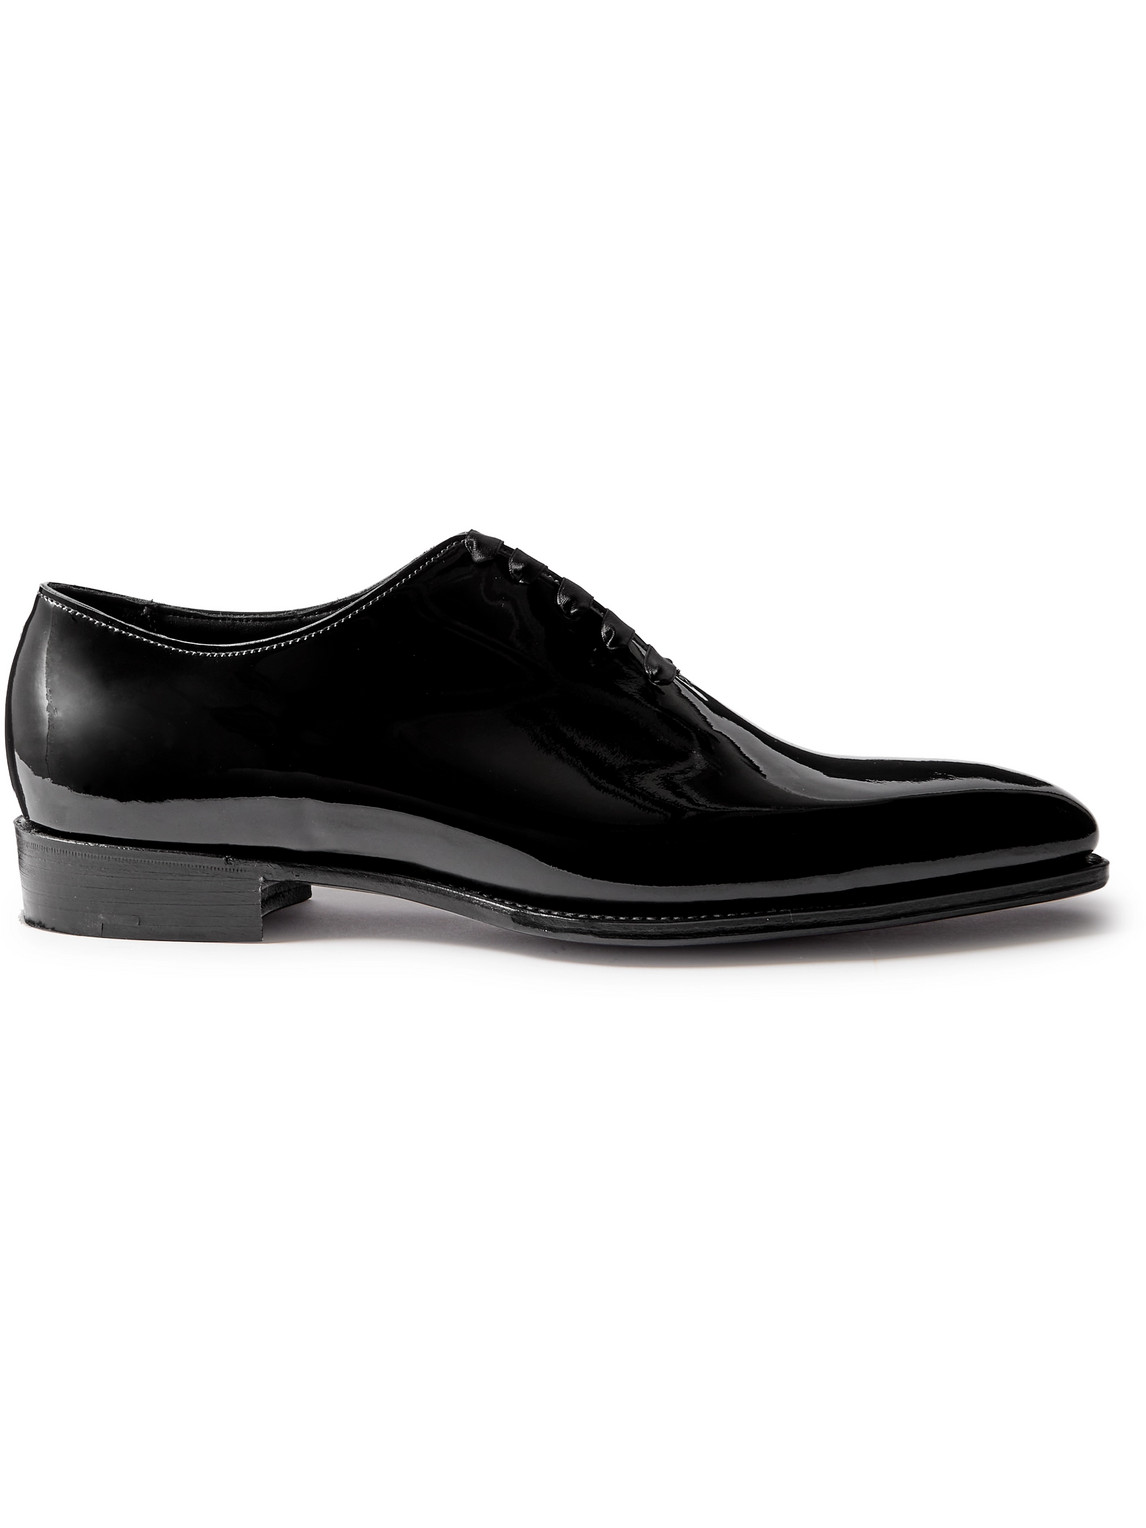 George Cleverley Merlin Whole-cut Patent-leather Oxford Shoes In Black